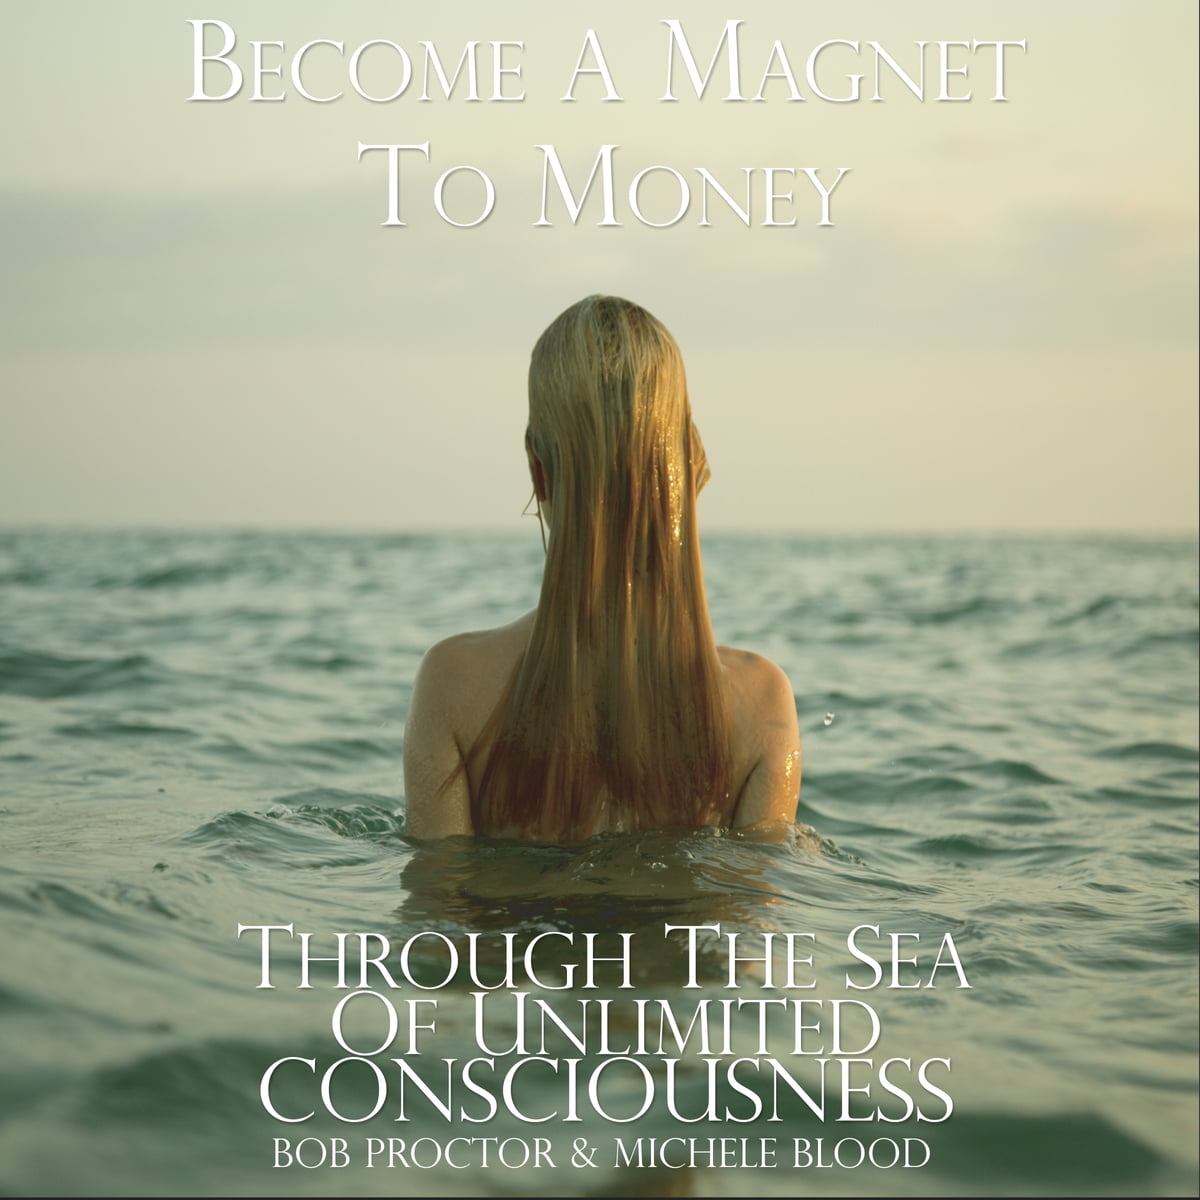 Bob Proctor & Michele Blood - Magnet To Money Through the Sea of Unlimited Consciousness